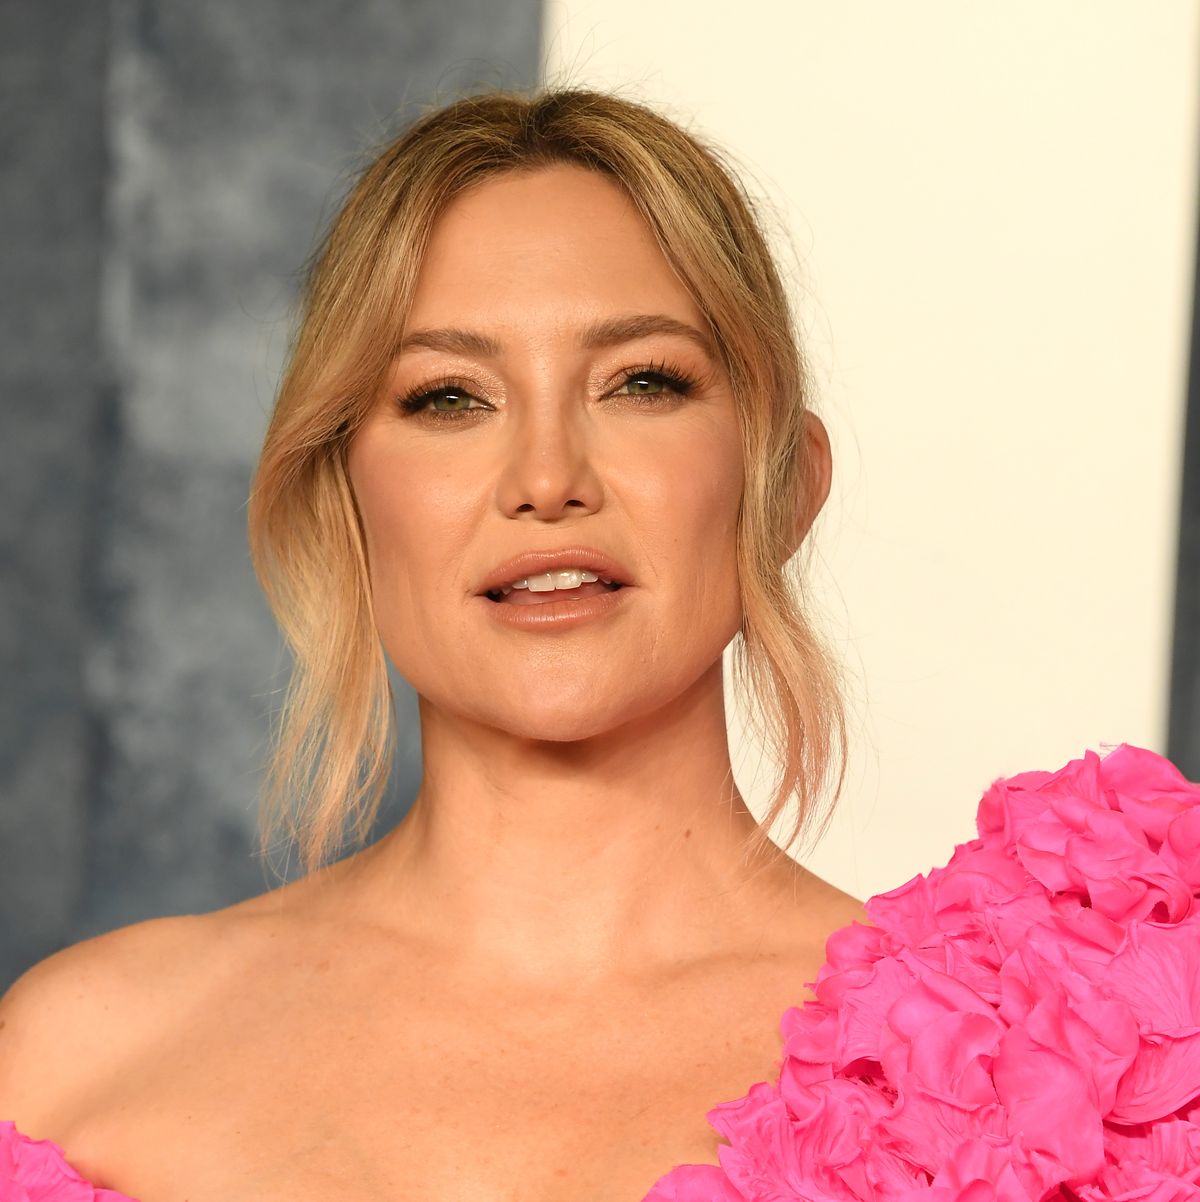 https://hips.hearstapps.com/hmg-prod/images/kate-hudson-arrives-at-the-vanity-fair-oscar-party-hosted-news-photo-1678909215.jpg?crop=0.951xw:0.721xh;0.00163xw,0&resize=1200:*